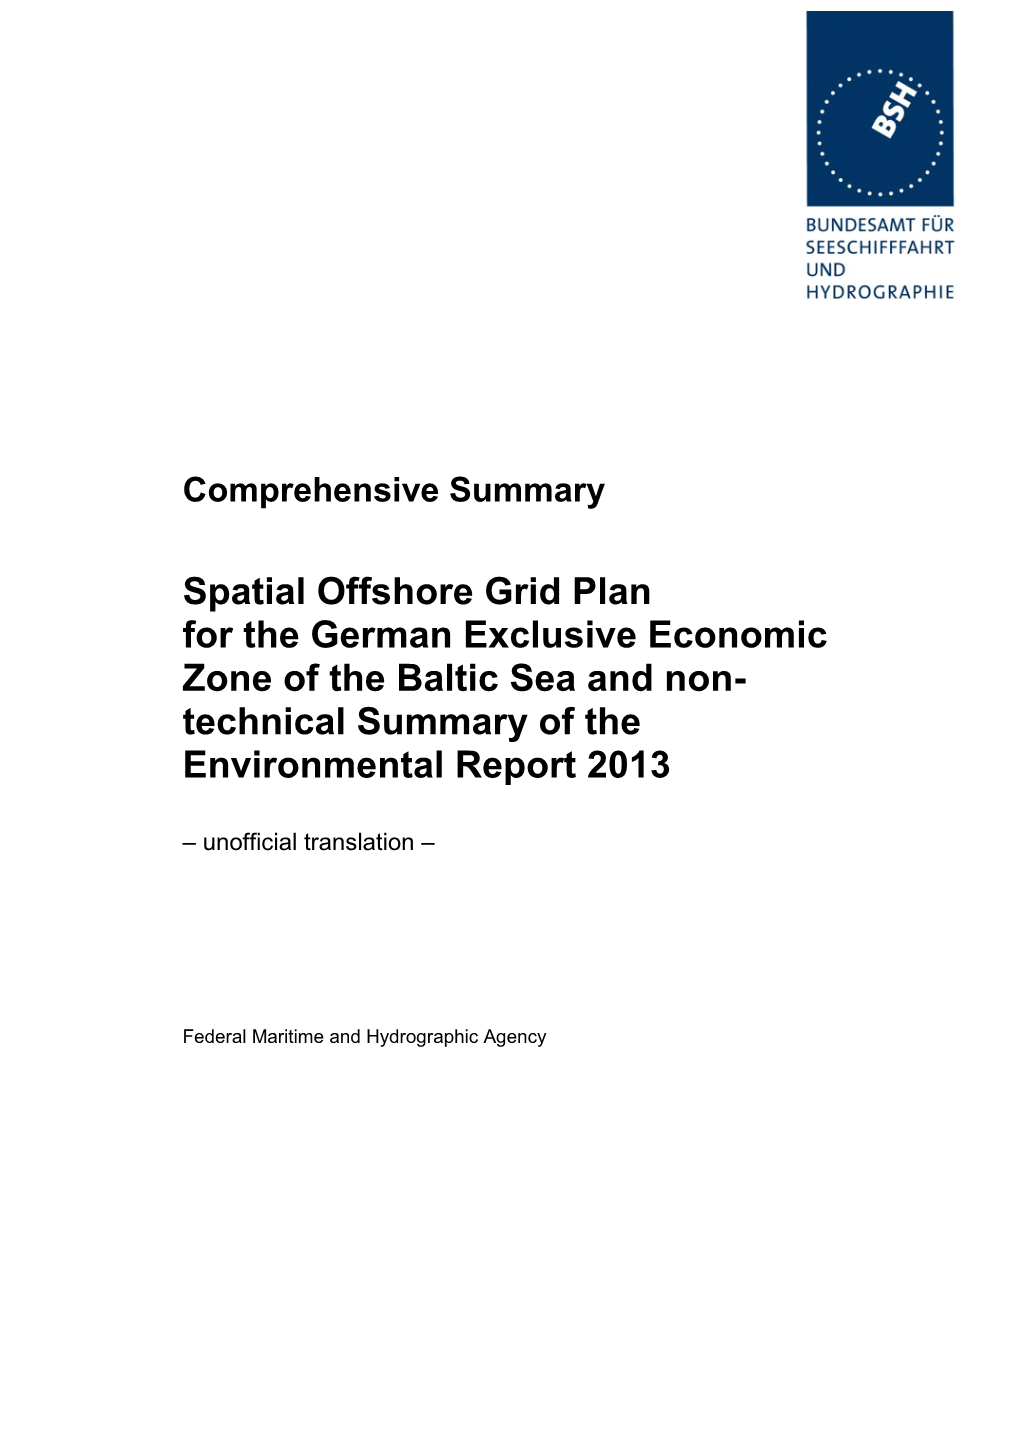 Spatial Offshore Grid Plan for the German Exclusive Economic Zone of the Baltic Sea and Non- Technical Summary of the Environmental Report 2013